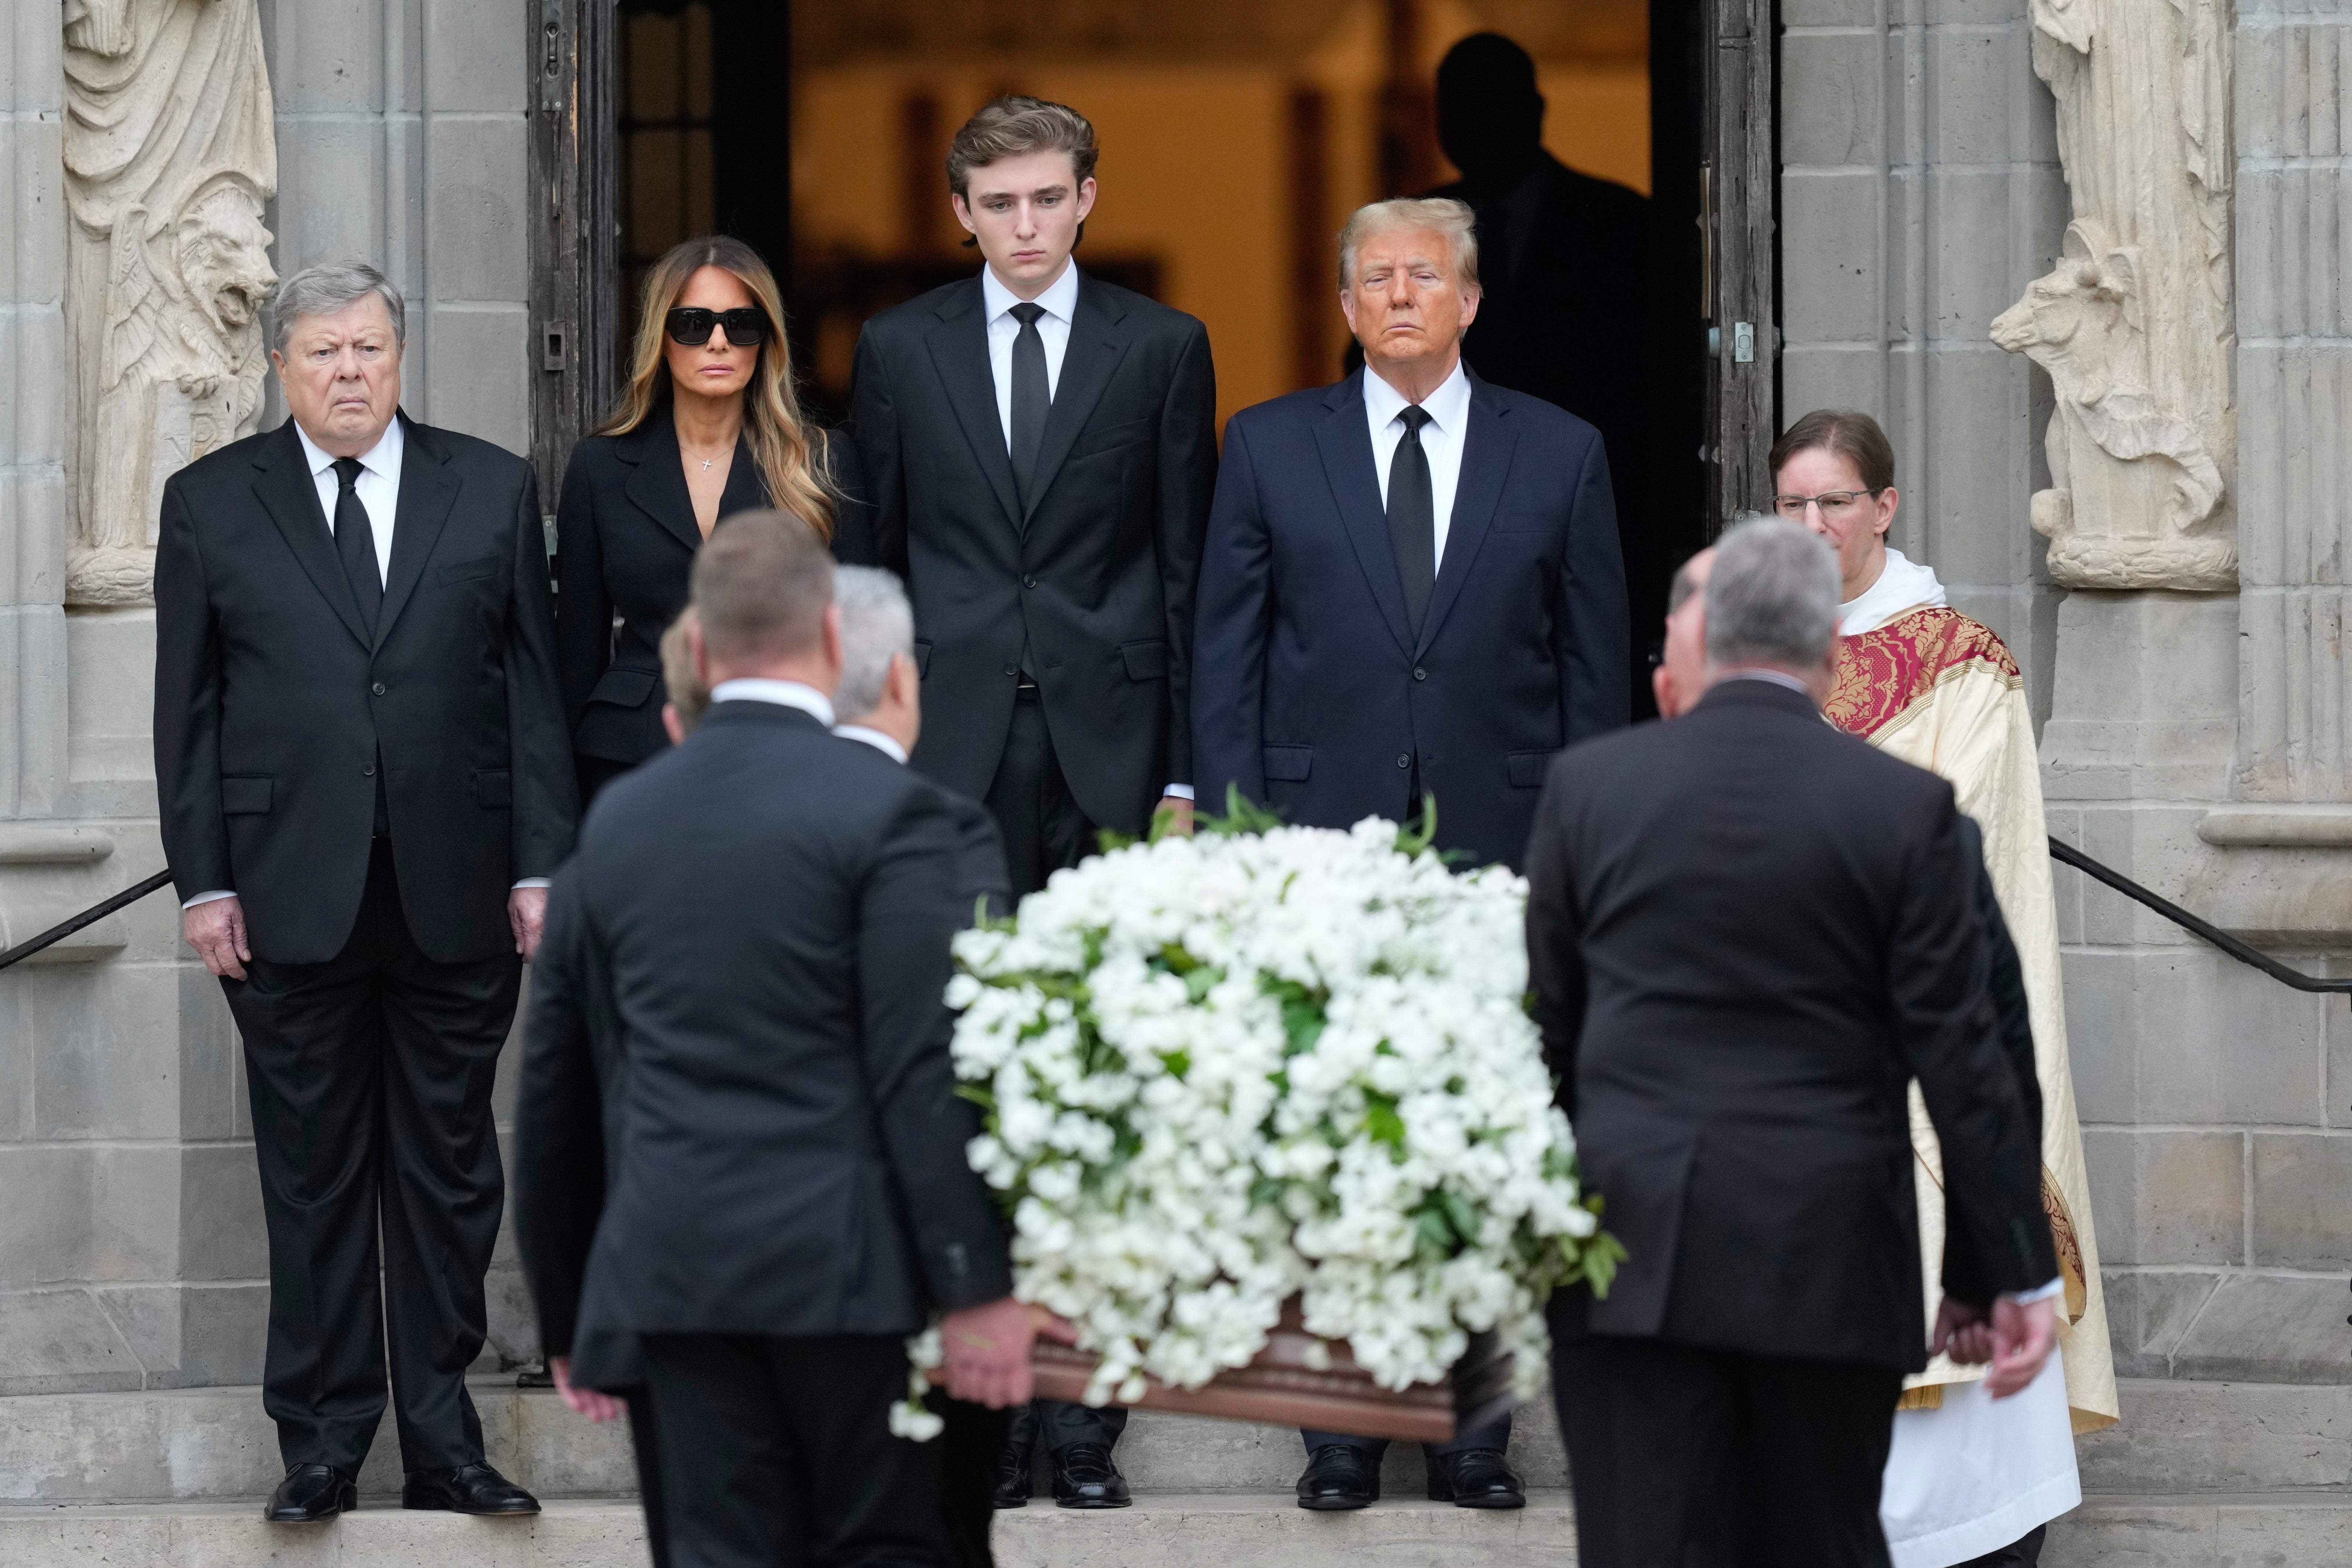 

<p>The Trump family attending the funeral of Amalija Knavs at the Church of Bethesda-by-the-Sea in Palm Beach, Florida</p>
<p>” height=”4262″ width=”6393″ layout=”responsive” i-amphtml-layout=”responsive”><i-amphtml-sizer slot=